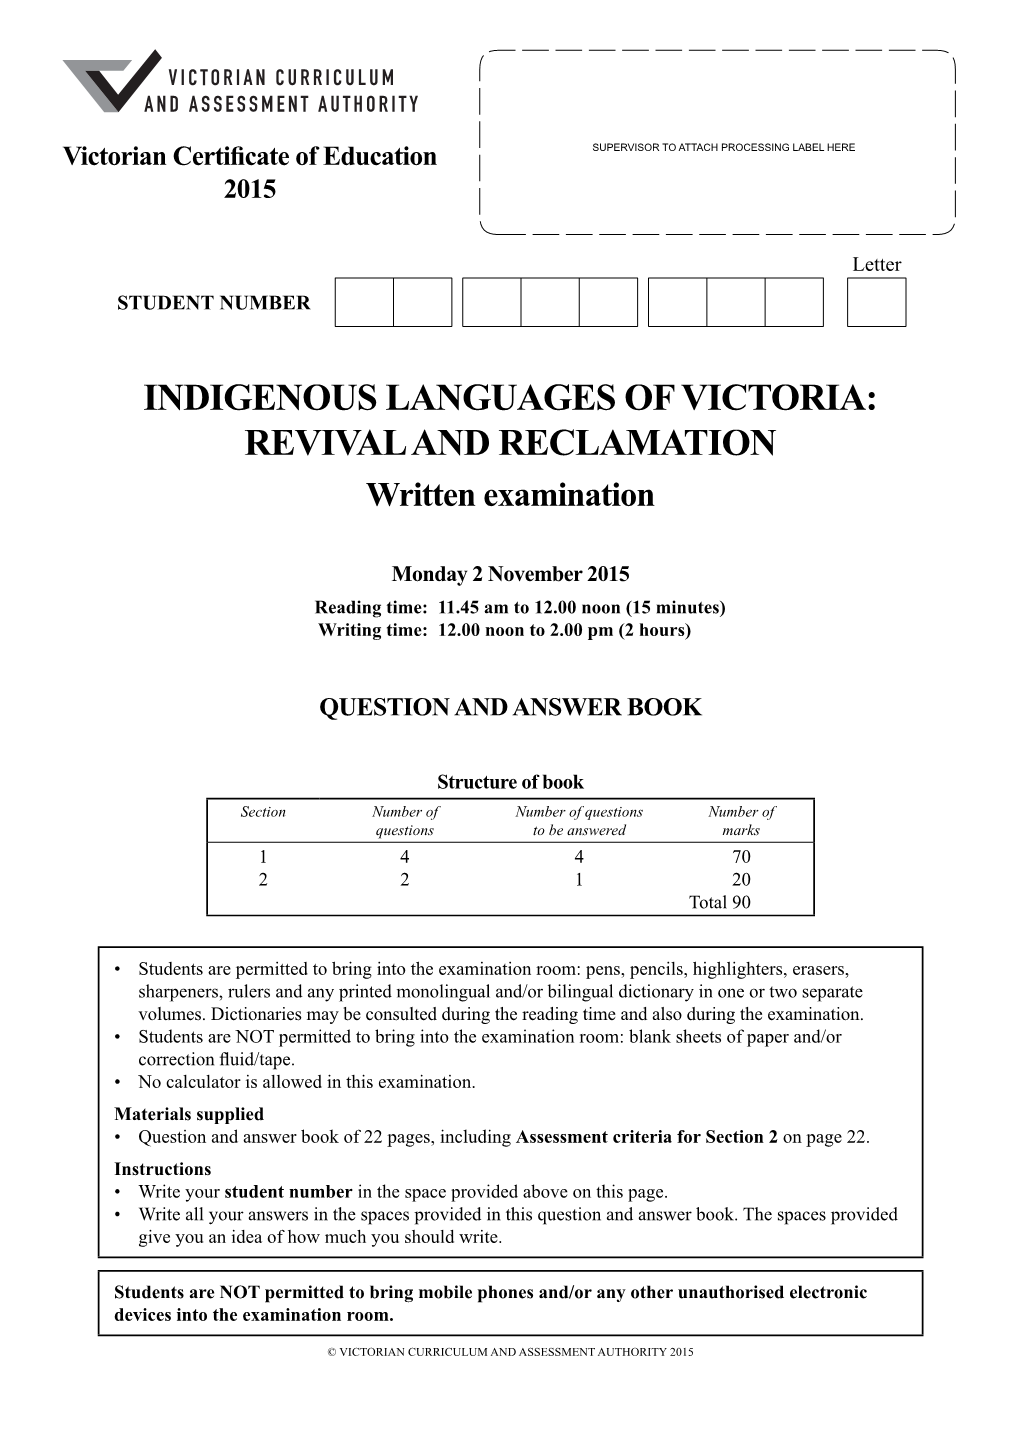 2015 Indigenous Languages of Victoria Revival and Reclamation Written Examination